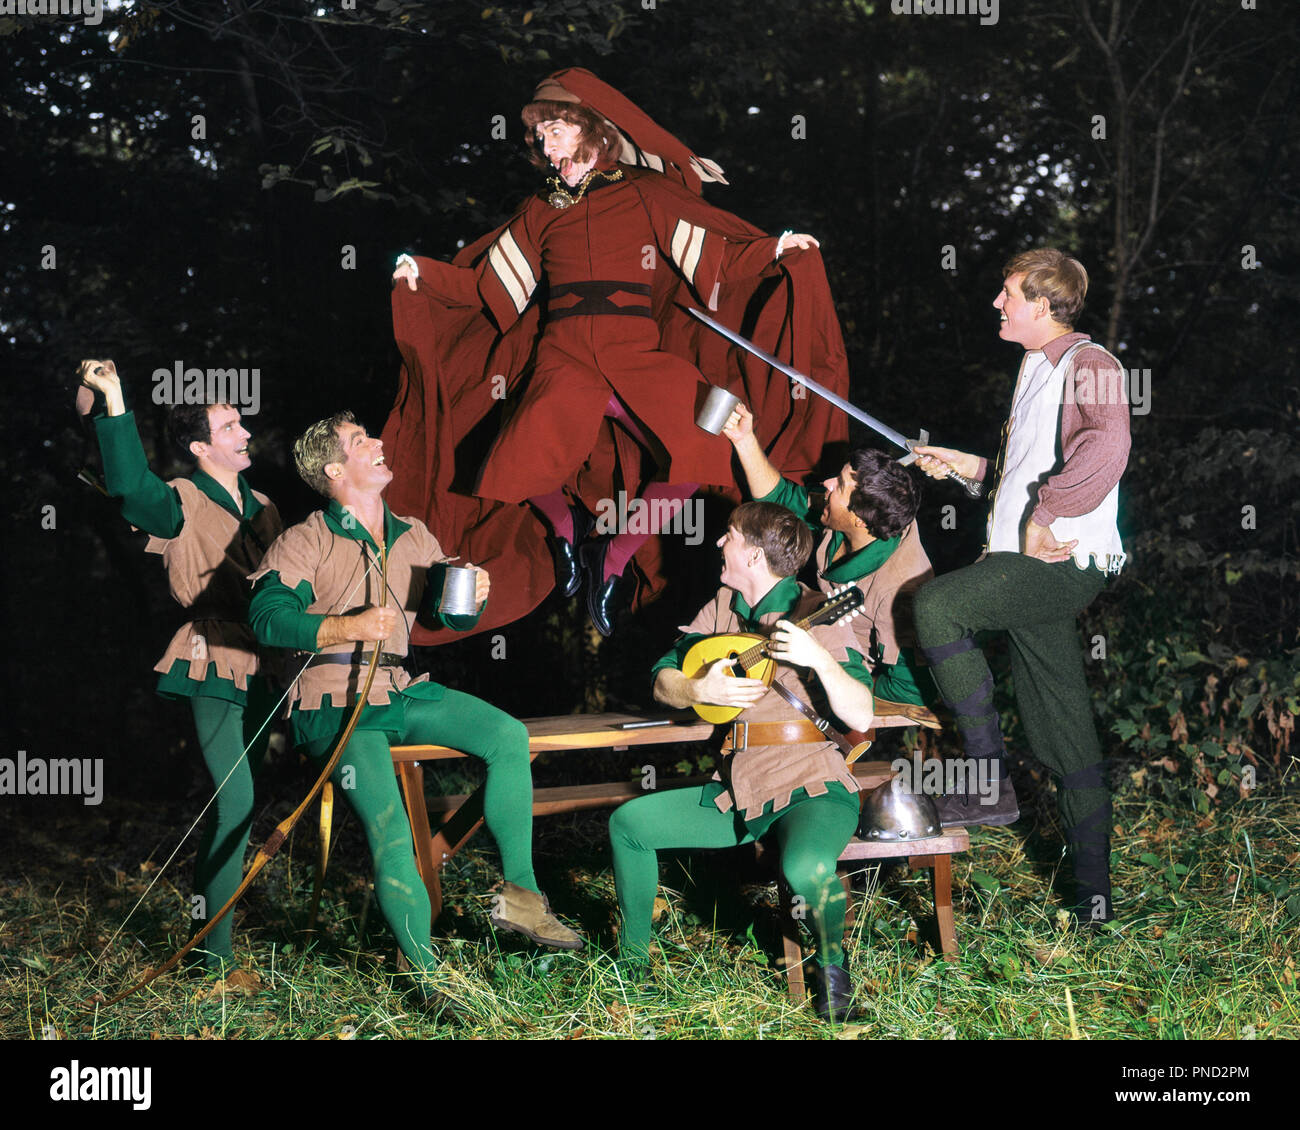 1980s TROUPE OF YOUNG MEN PLAYING ACTING ROBIN HOOD AND HIS MERRY MEN IN SHERWOOD FOREST - kc9929 PHT001 HARS SWORD DRUNK MANY COMMUNICATION SINGER COSTUMES ENTERTAINING LIFESTYLE ACTOR CELEBRATION GROWNUP 6 COMMUNICATING FRIENDSHIP FULL-LENGTH PERSONS GROWN-UP CHARACTER ARROW SIX SING ENTERTAINMENT ACTING VEST GANG PEOPLE STORY HUMOROUS ADVENTURE BEVERAGE PERFORMER ENTERTAIN UNIVERSITIES MERRY EXCITEMENT FAMOUS FLUID RECREATION SONG VOICE VOCAL MUSICAL INSTRUMENT HIGHER EDUCATION DRUNKEN CONCEPTUAL ACTORS NOURISHMENT STYLISH COLLEGES MANDOLIN SHERWOOD FOREST COMMUNICATE HERO OUTLAW PERFORMERS Stock Photo